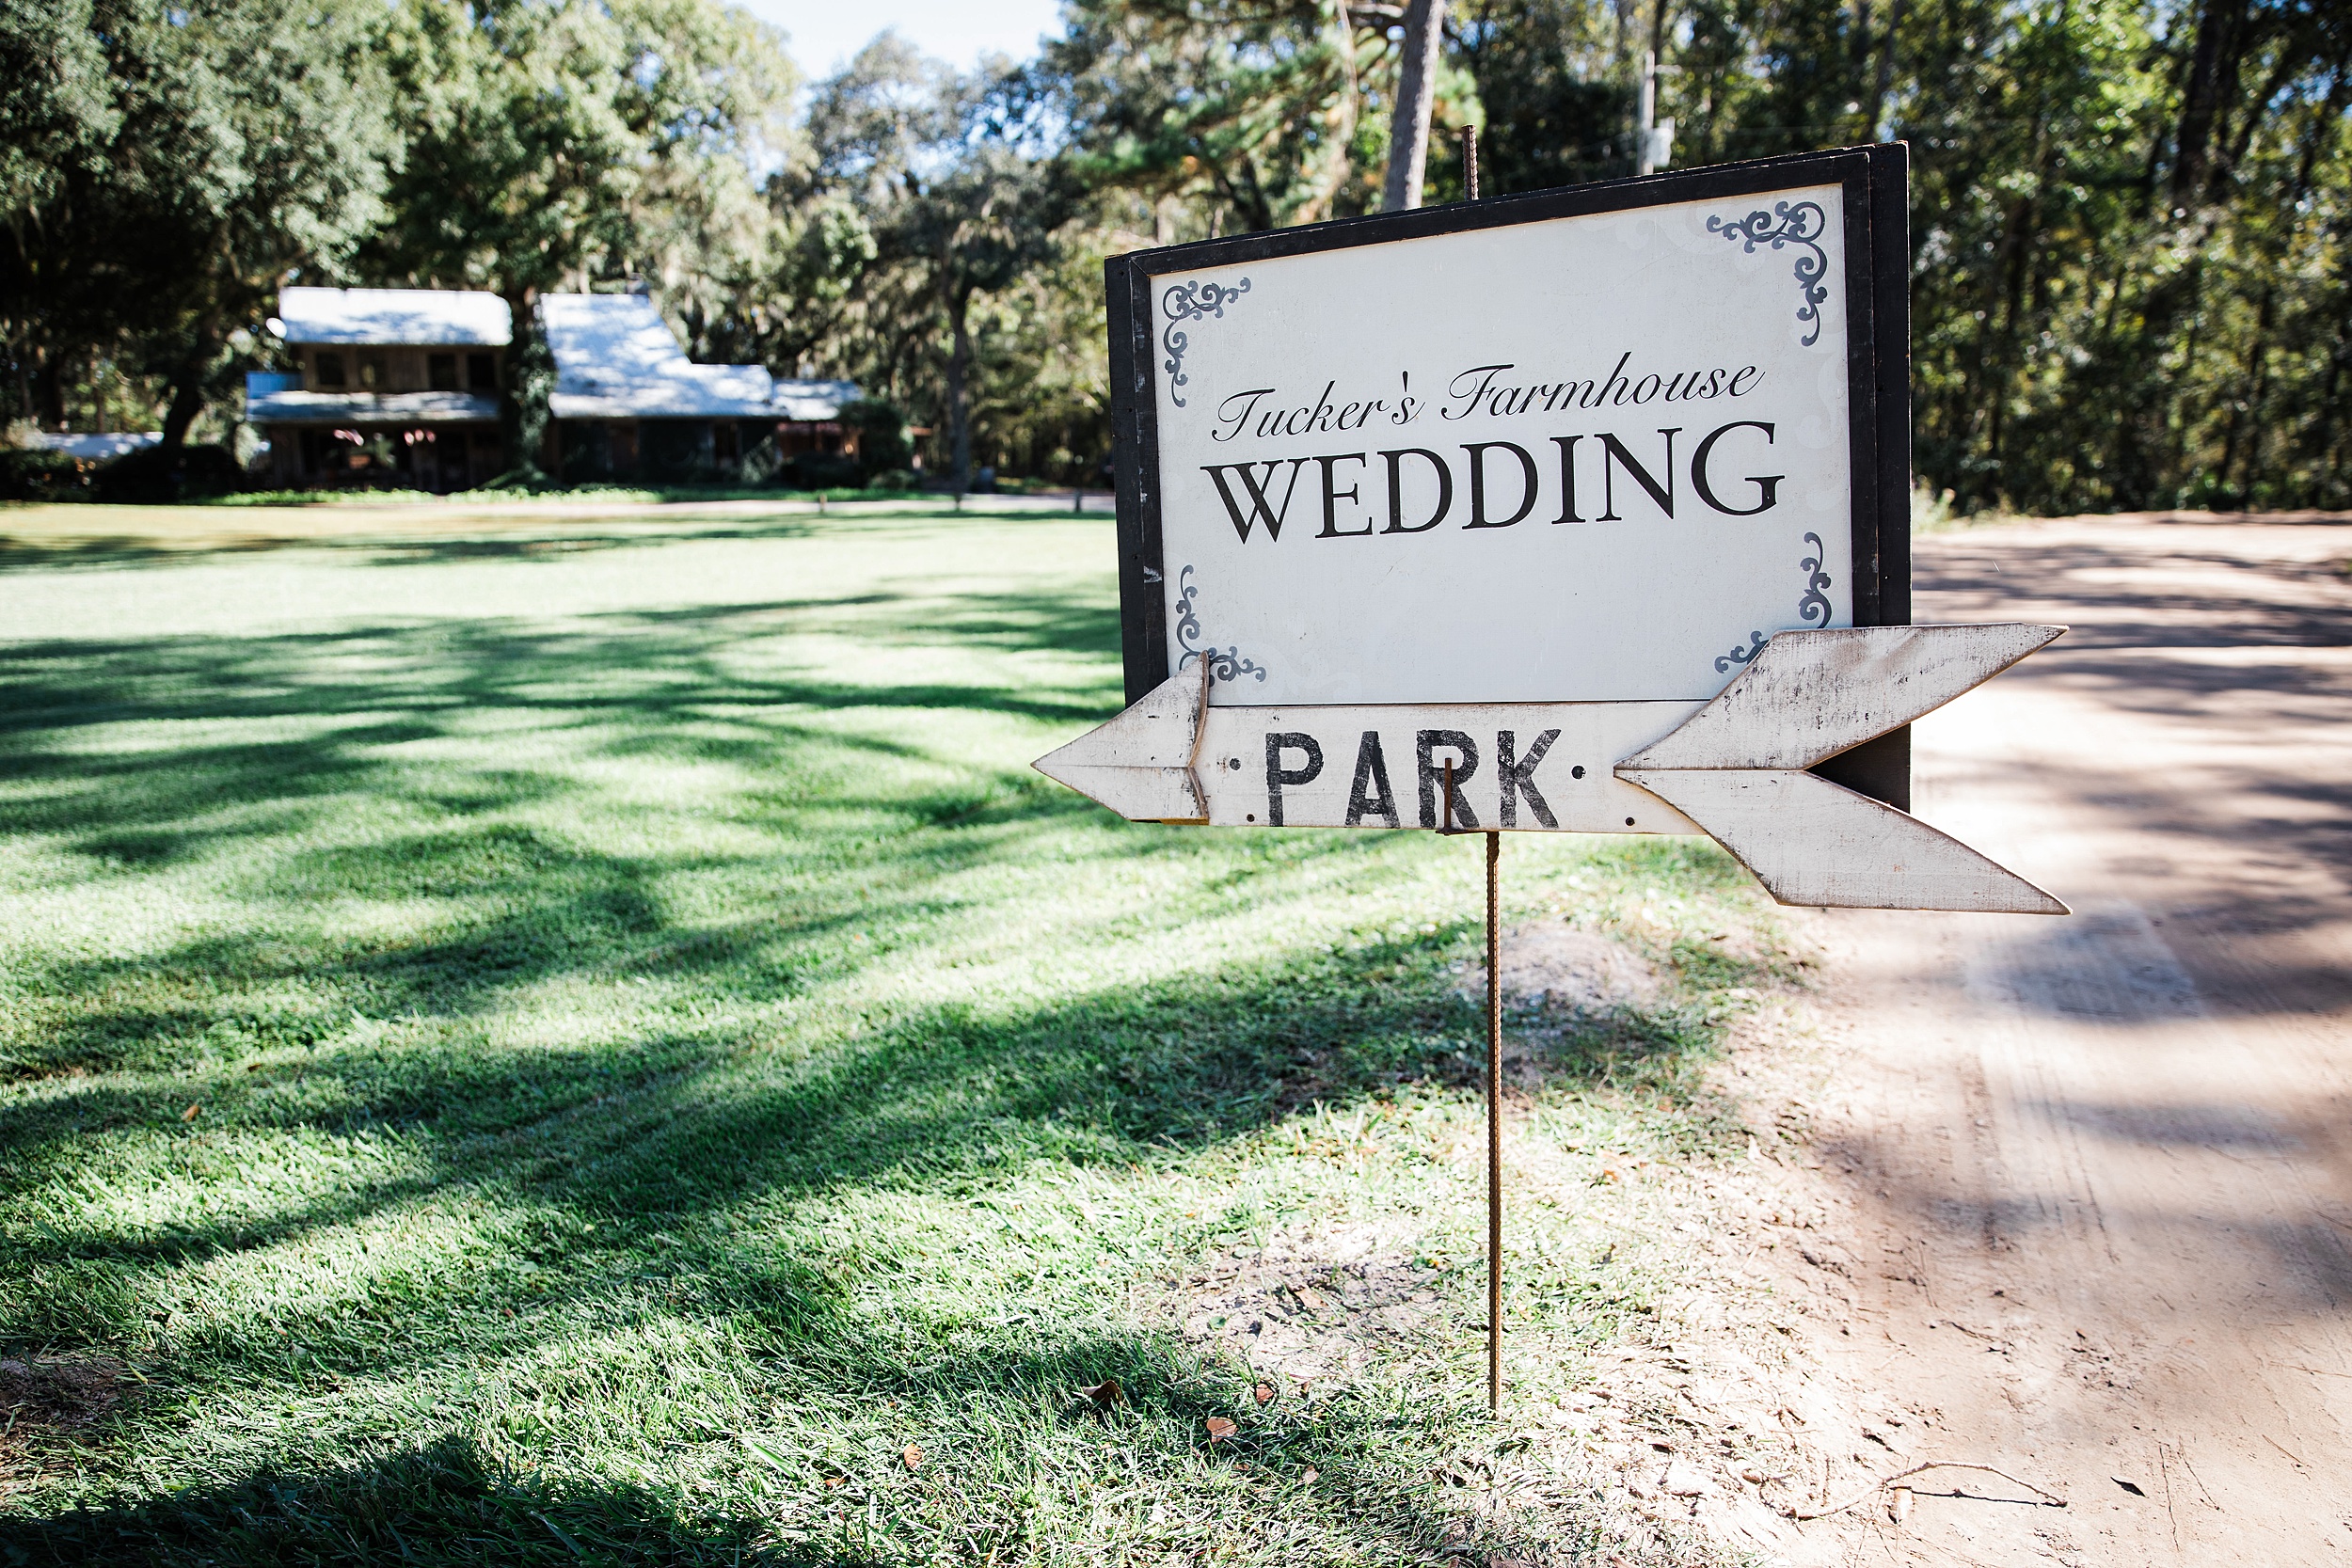 Details of a wedding ceremony parking sign of a rustic Florida wedding venue